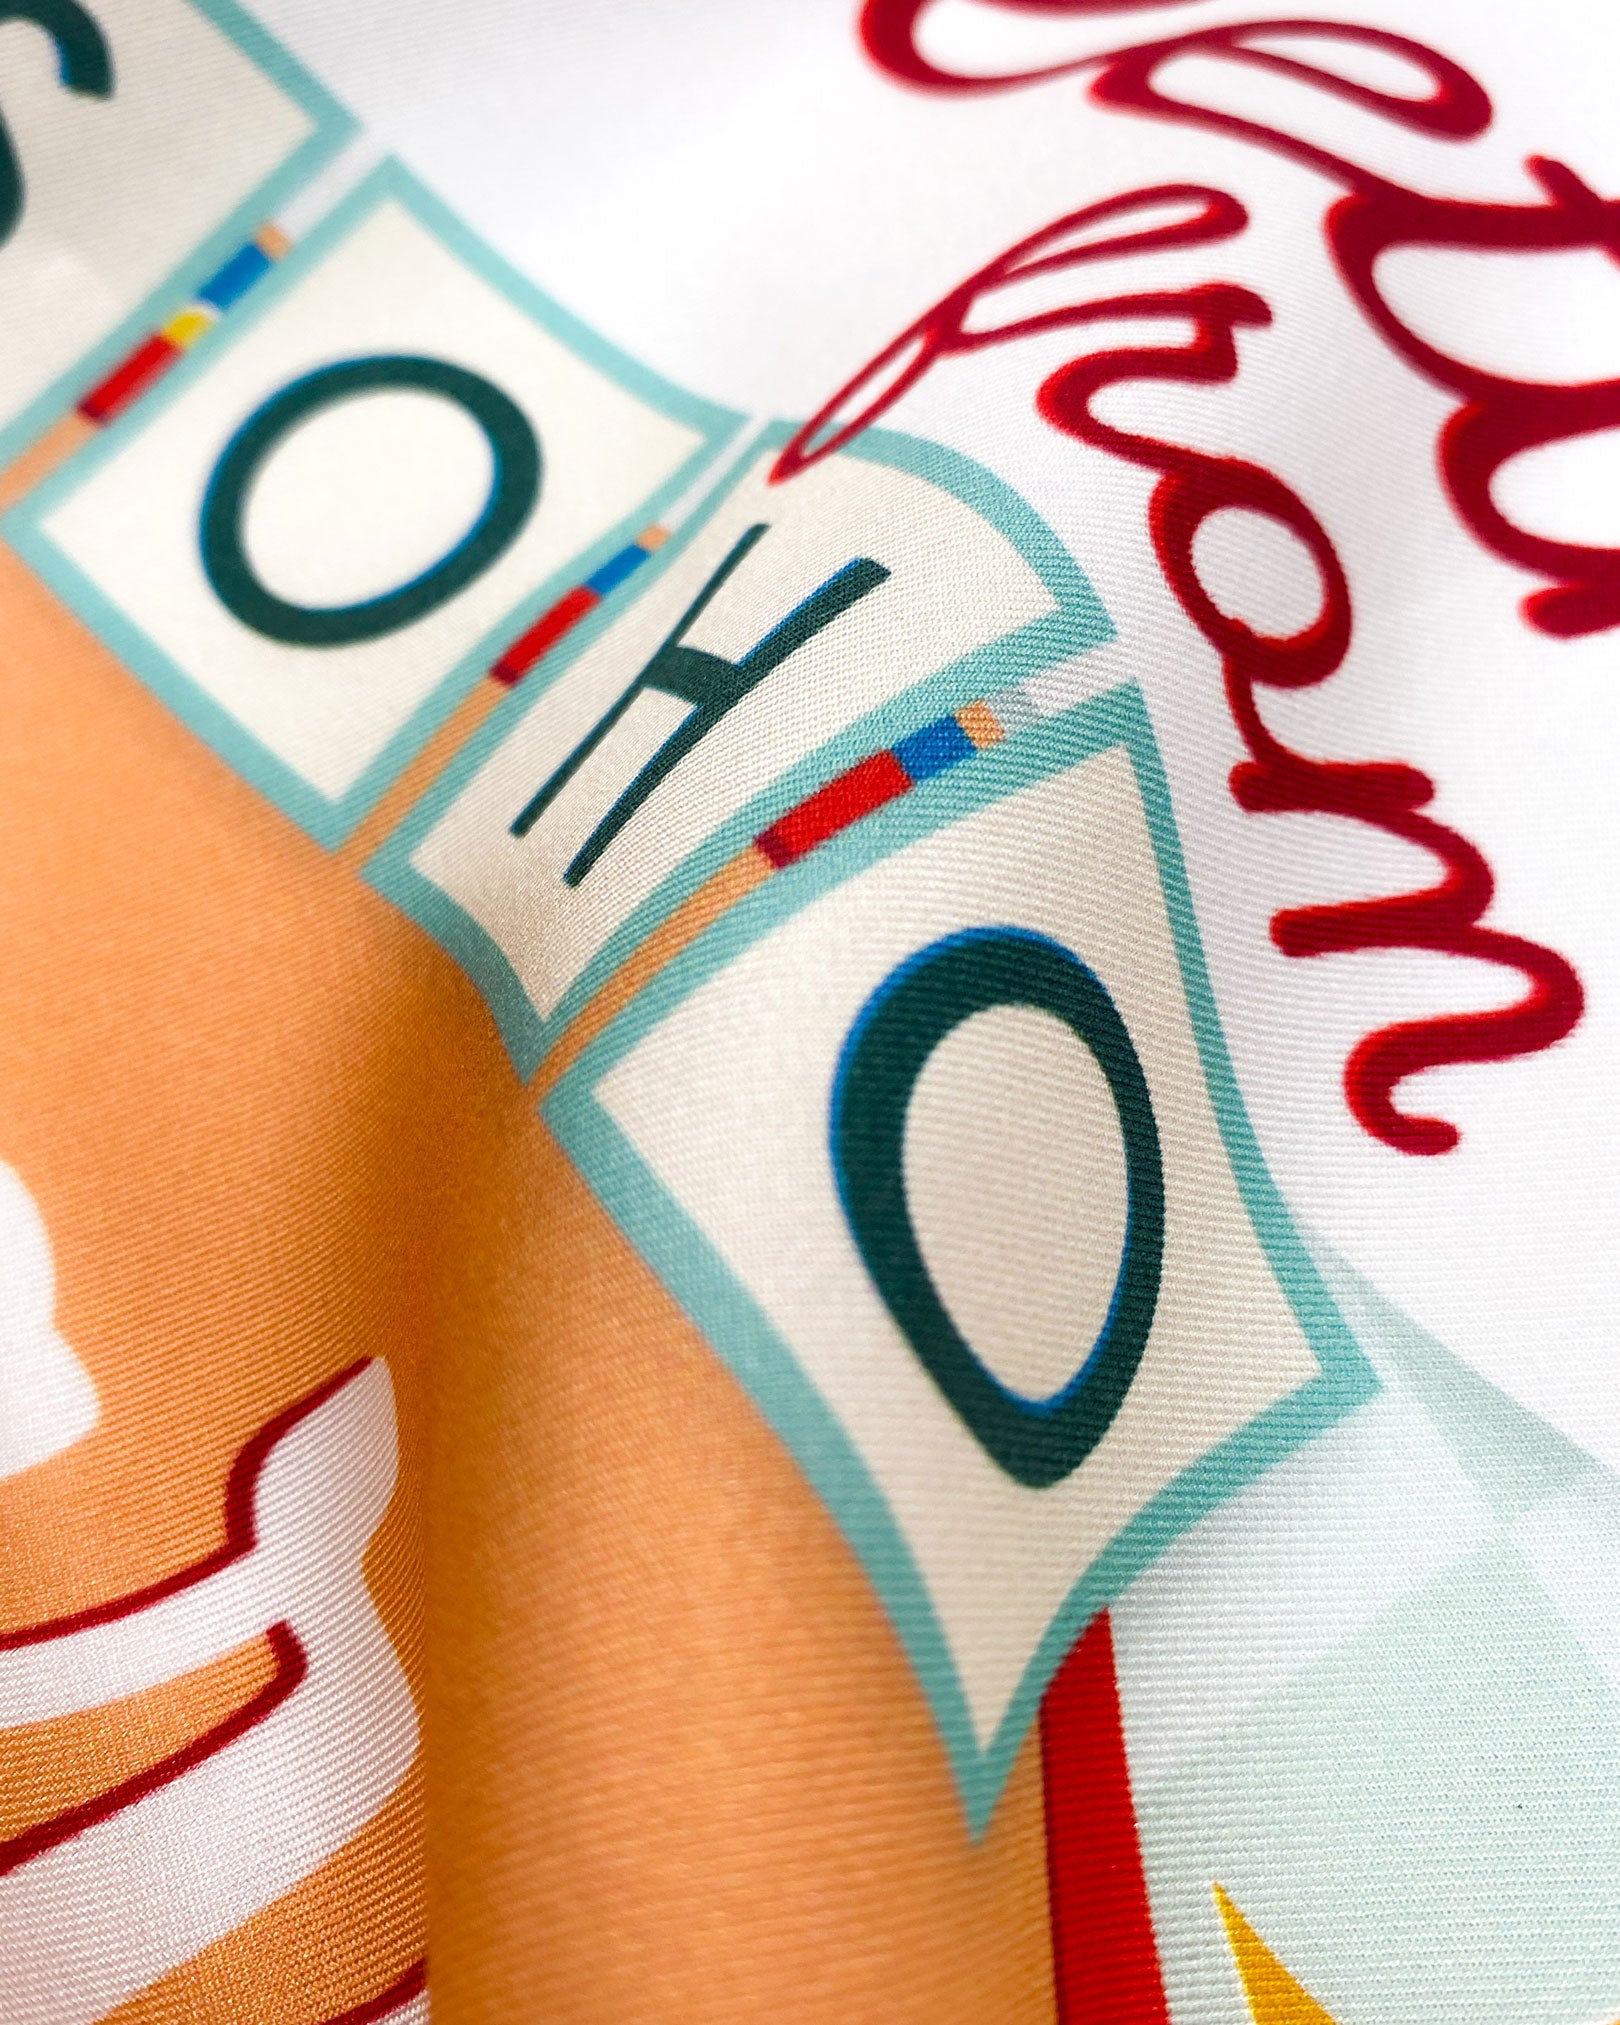 A ruffled close-up of the 'Soho Sign' blue silk headscarf, presenting a closer look at a portion of the signage design and the material's subtle lustre.